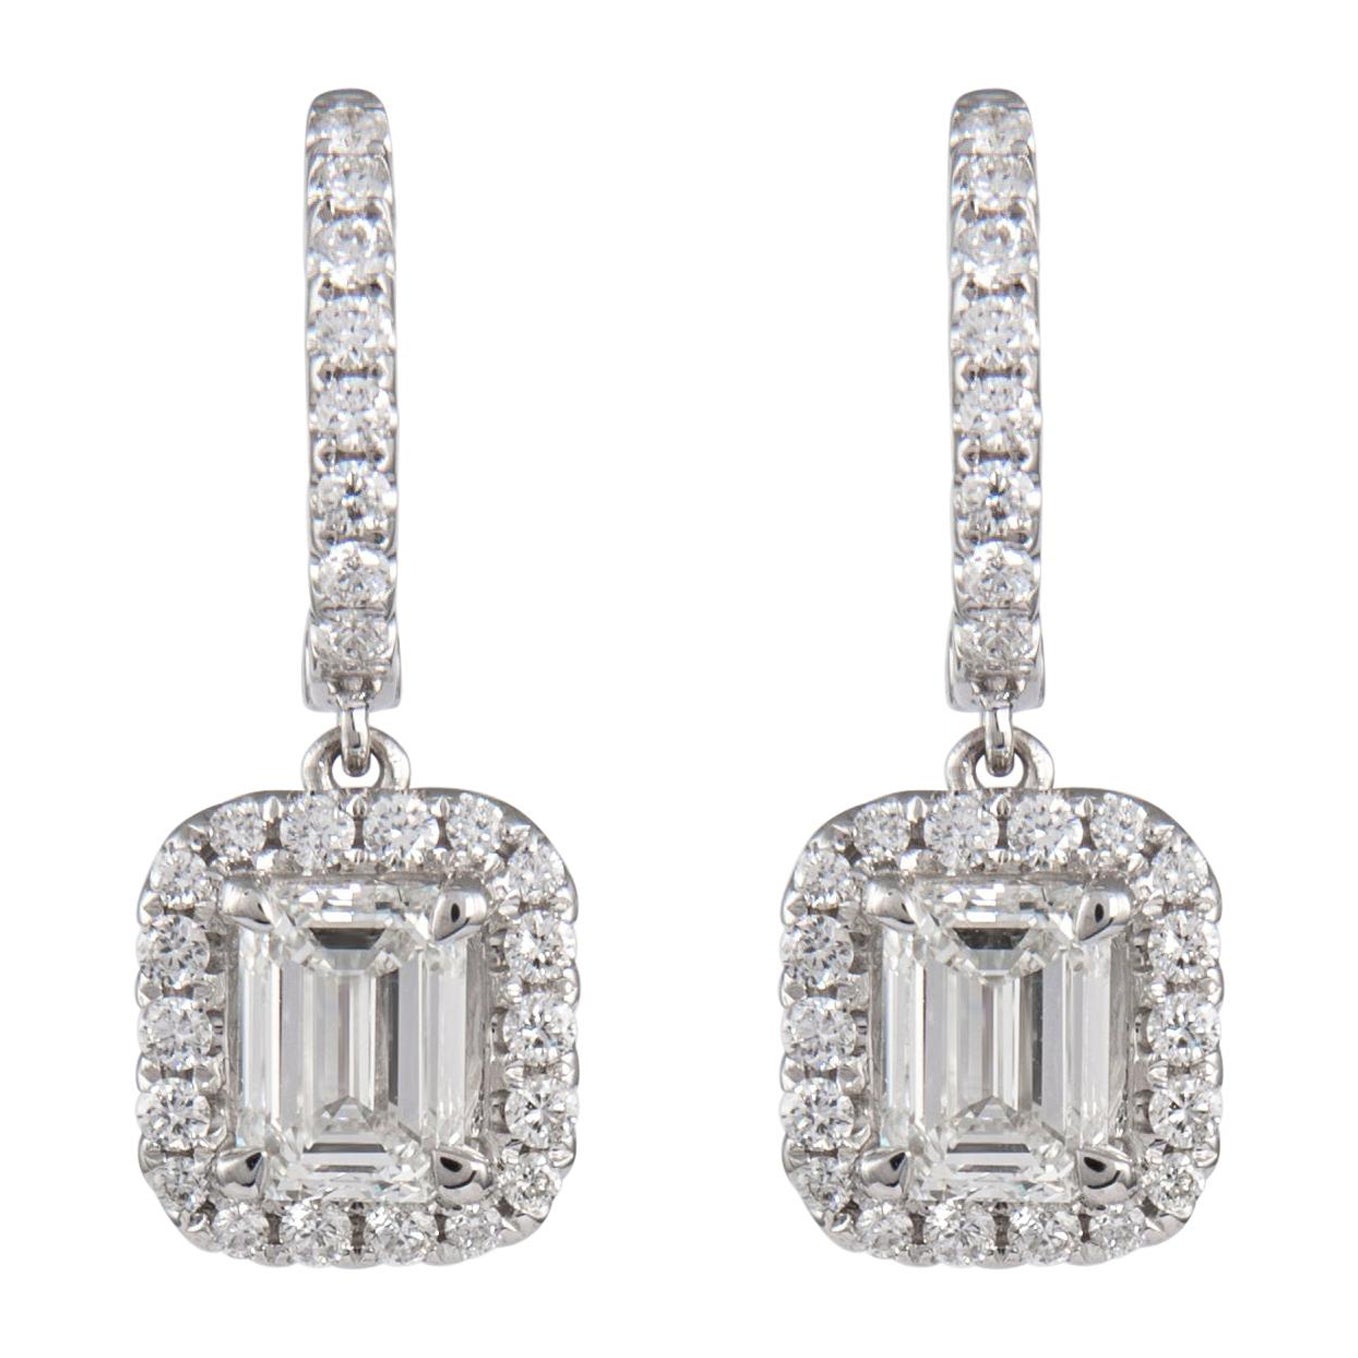 Alexander GIA 2.04ct Emerald Cut Diamond Drop Earrings with Halo 18k White Gold For Sale